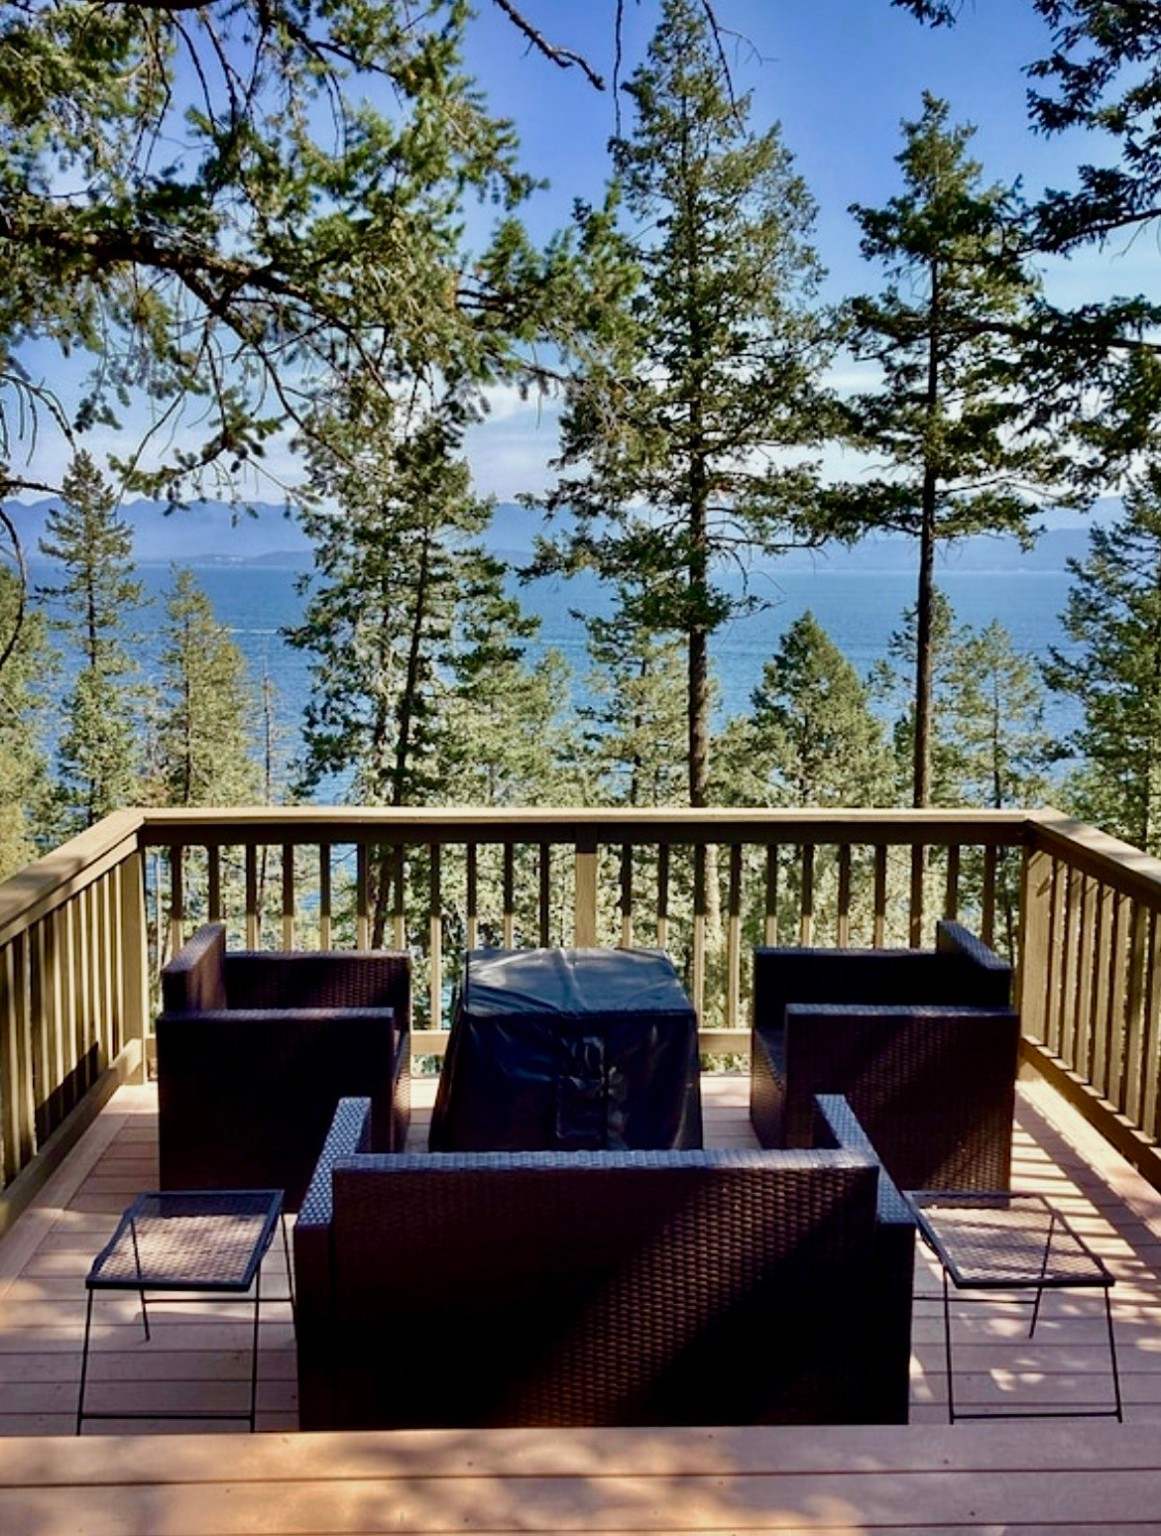 EXTREMELY MOTIVATED SELLERS!! Enhance your investment portfolio and invest in this magical cabin with incredible Flathead Lake views from a sprawling deck! The 1 bedroom, 1 bathroom cabin stuns with an open floor concept and custom cabinets in the kitchen. The large deck is comprised of Trex materials opening up to sparkling Flathead Lake peeking through the trees. The ideal location for a lucrative VRBO, this cabin is suited to store toys, boats, and vehicles in the large heated three-car garage. Expand the land for which you have to roam and take delight in the private, tranquil point three miles from Lakeside. Play on the lake and enjoy fishing, hunting, and scenic drives all year long. Recreation is abundant so marketing a vacation rental is simple! A true gem, this mountainside wonder is turn-key with furnishings included! Call Kelsey Judisch-Eisenzimer at 
661-281-5187 or your real estate professional. Local Area

 Lakeside, Montana clings to the shore of Flathead Lake along US Highway 93. The tourist town gives visitors access to the lake and gorgeous views of the Swan Mountains. Lakeside is a short fifteen-minute drive south of Kalispell, Montana and two hours north of Missoula, Montana.  

Experience the vibrant historic downtown district of Kalispell, Montana. Kalispell became a city in 1891. Community members donated silver coins to be melted down into a stake to mark the railroad and the town’s beginning. The railroad helped Kalispell thrive by bringing industrial industries such as farming, sawmills, and flour mills. The mountain town is situated in the center of the Flathead Valley and serves as an excellent base camp for those traveling around northwest Montana. The town has shopping, three golf clubs, restaurants, art galleries, and access to outdoor activities. 

Tucked into the bay where the Swan River flows into Flathead Lake, the charming town of Bigfork, Montana offers a resting place for tourists and lake-goers. The town has golf, fine restaurants, art galleries, and live theatre. It holds many titles one of which is “One of the 100 Best Small Art Towns in the Nation.”
 

Area Attractions
 

Flathead Lake 

Flathead Lake is a popular destination in Western Montana with over 200 square miles of water to kayak, boat, paddleboard, canoe, swim, fish, and recreate on. The vast lake spans 30 miles and measures a depth of 300 feet. It is the largest natural freshwater lake on this side of the Mississippi! Stop at one of the many roadside stands in the summer months to purchase fresh and locally grown cherries, apples, plums, and other produce. Cabins, campgrounds, vacation rentals, and hotels are scattered along the shoreline offering superb lodging. This hotspot is surrounded by the Mission, Salish, Swan, and Whitefish mountains making it a beautiful vacation destination. 

Glacier National Park 

The coveted area nicknamed the “Crown of the Continent” for obvious reasons offers gems and views of gold in the state of Montana. With over 700 miles of trails through pristine forests, alpine meadows sprinkled with bright lovely wildflowers, rugged and tenacious mountains, and spectacular sparkling lakes. Visit the historic chalets and lodges for a walk back in time or backpack, cycle, hike, or camp. While taking in the astounding sights of the glacier-carved peaks and valleys, set your binoculars on a diverse range of wildlife of bighorn sheep, mountain goats, deer, elk, ptarmigan, and both black and grizzly bears. This highway to heaven is a tough one to ever forget. 

Winter Recreation 

Whitefish Mountain Ski Resort 

The Whitefish Mountain Ski Resort is located in Whitefish, Montana on Big Mountain. There are over 100 trails on 3,000 acres of terrain. The vertical drop on Big Mountain is 2,353 feet and is served by 11 chairlifts, two T-bars, and a magic carpet. 

Blacktail Mountain Ski Area 

The Blacktail Mountain Ski Area is a tight-knit family-style atmosphere 28 miles southwest of Kalispell. The vertical drop is 1,440 feet served by 3 chairlifts and a rope tow. There are almost 30 trails with a vast majority being easy or intermediate in difficulty.